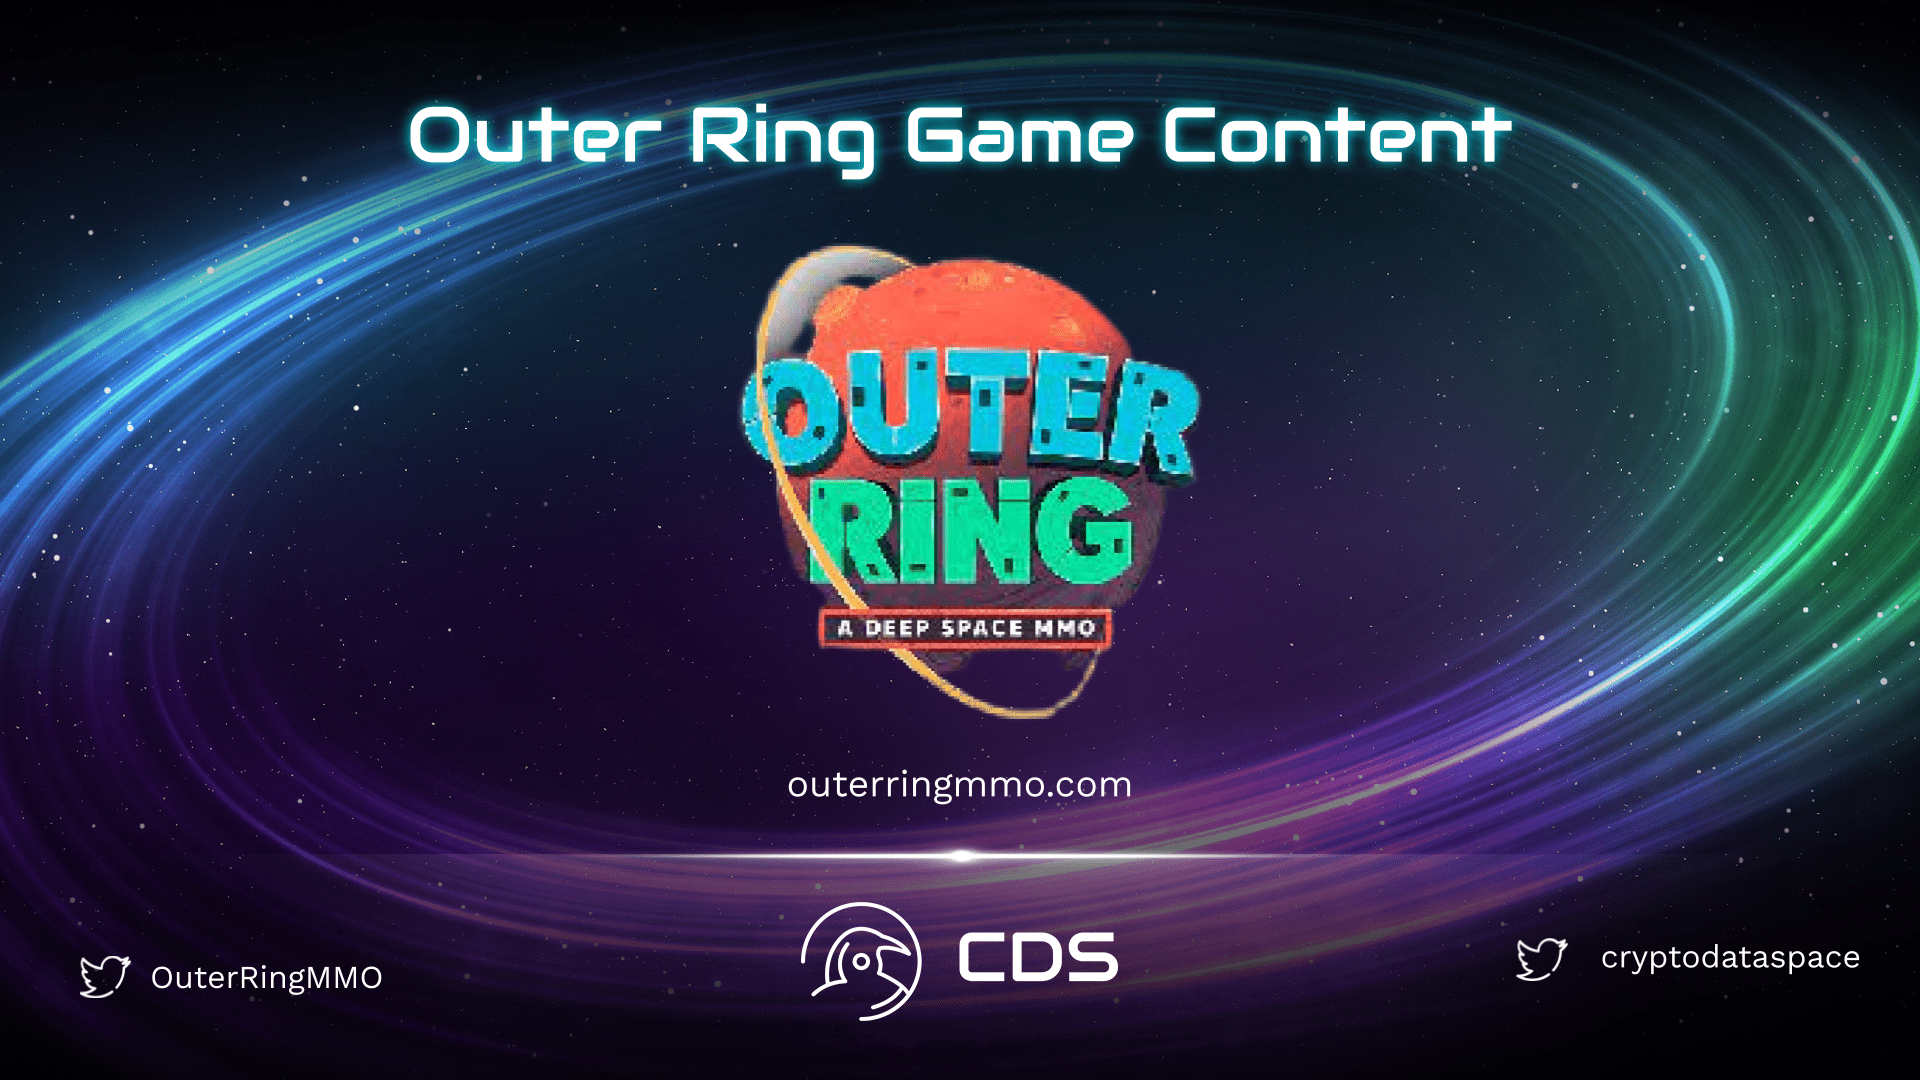 Outer Ring Game Content